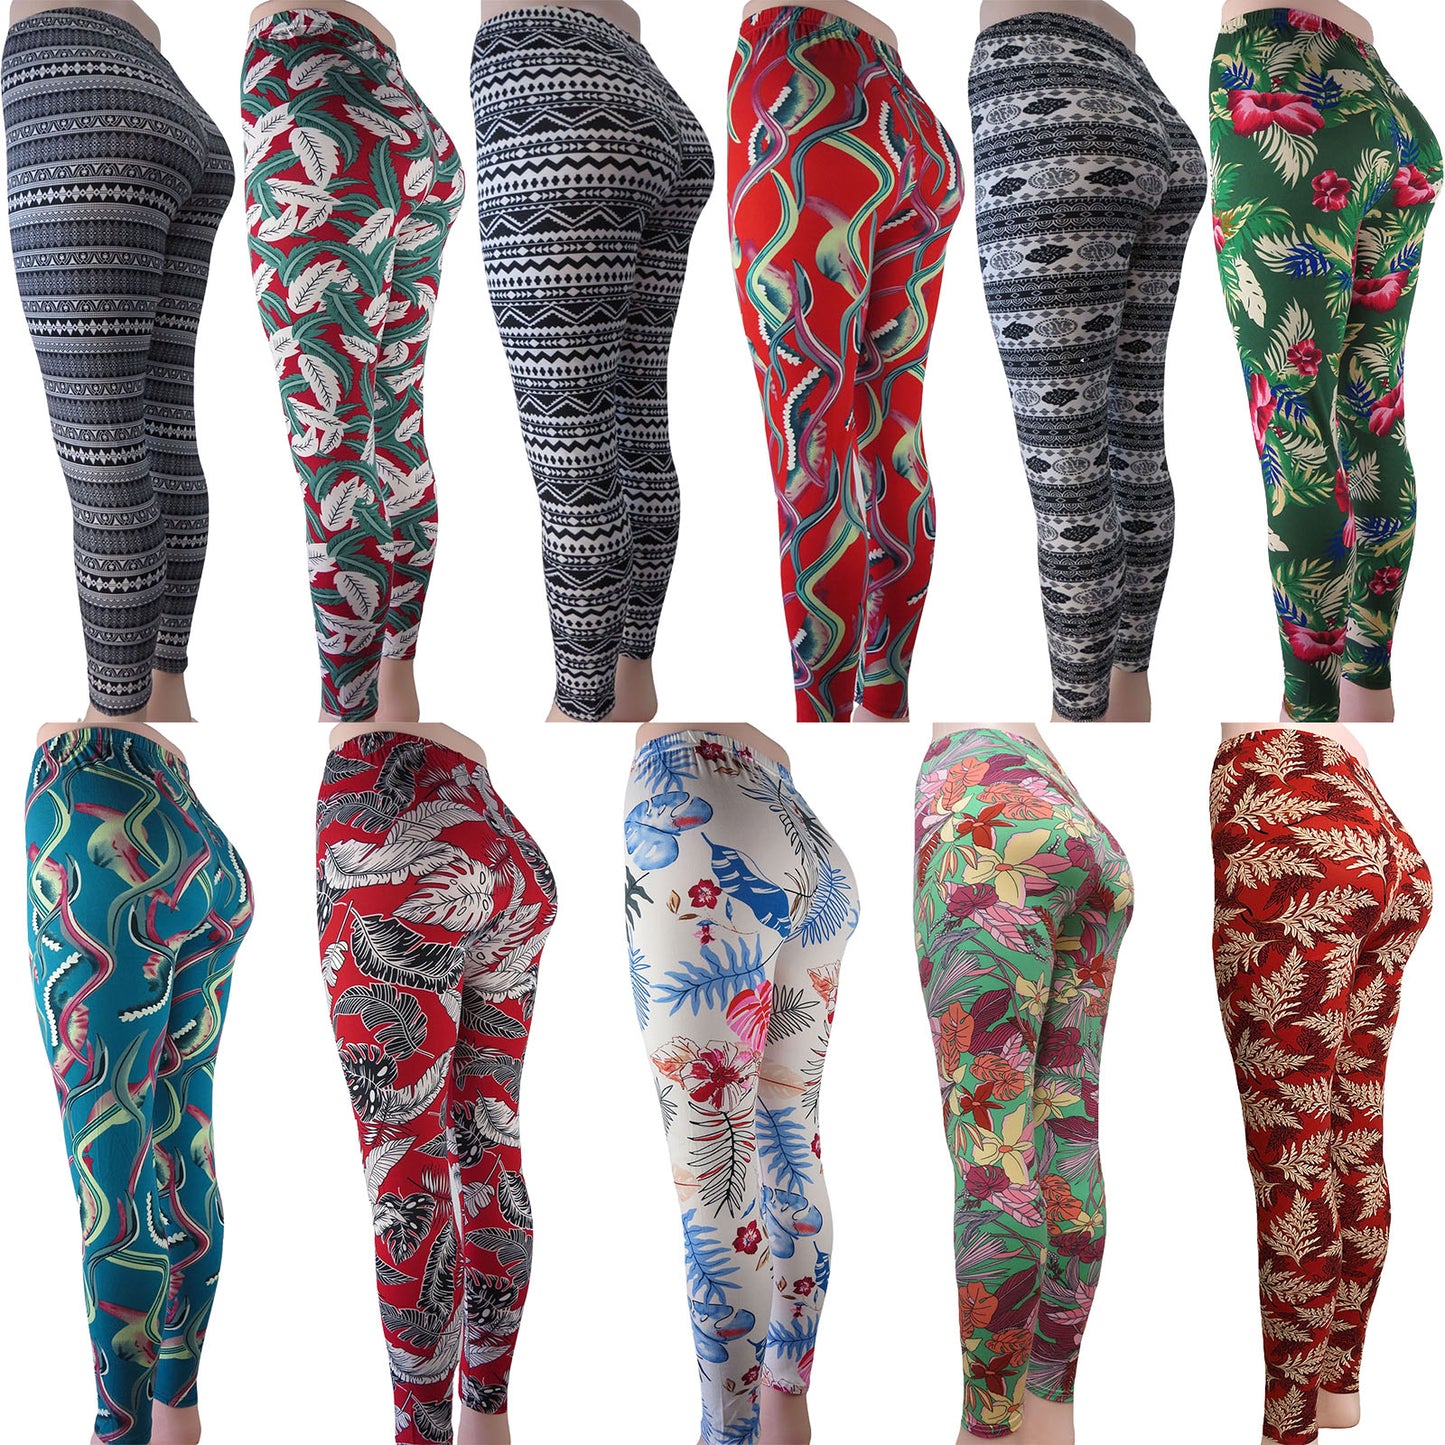 ITEM NUMBER: AP700-MIX3 (12 PIECE PACK WAS $3.00 - CLEARANCE SALE JUST $2.00 / PIECE) CLEARANCE WHOLESALE LEGGINGS